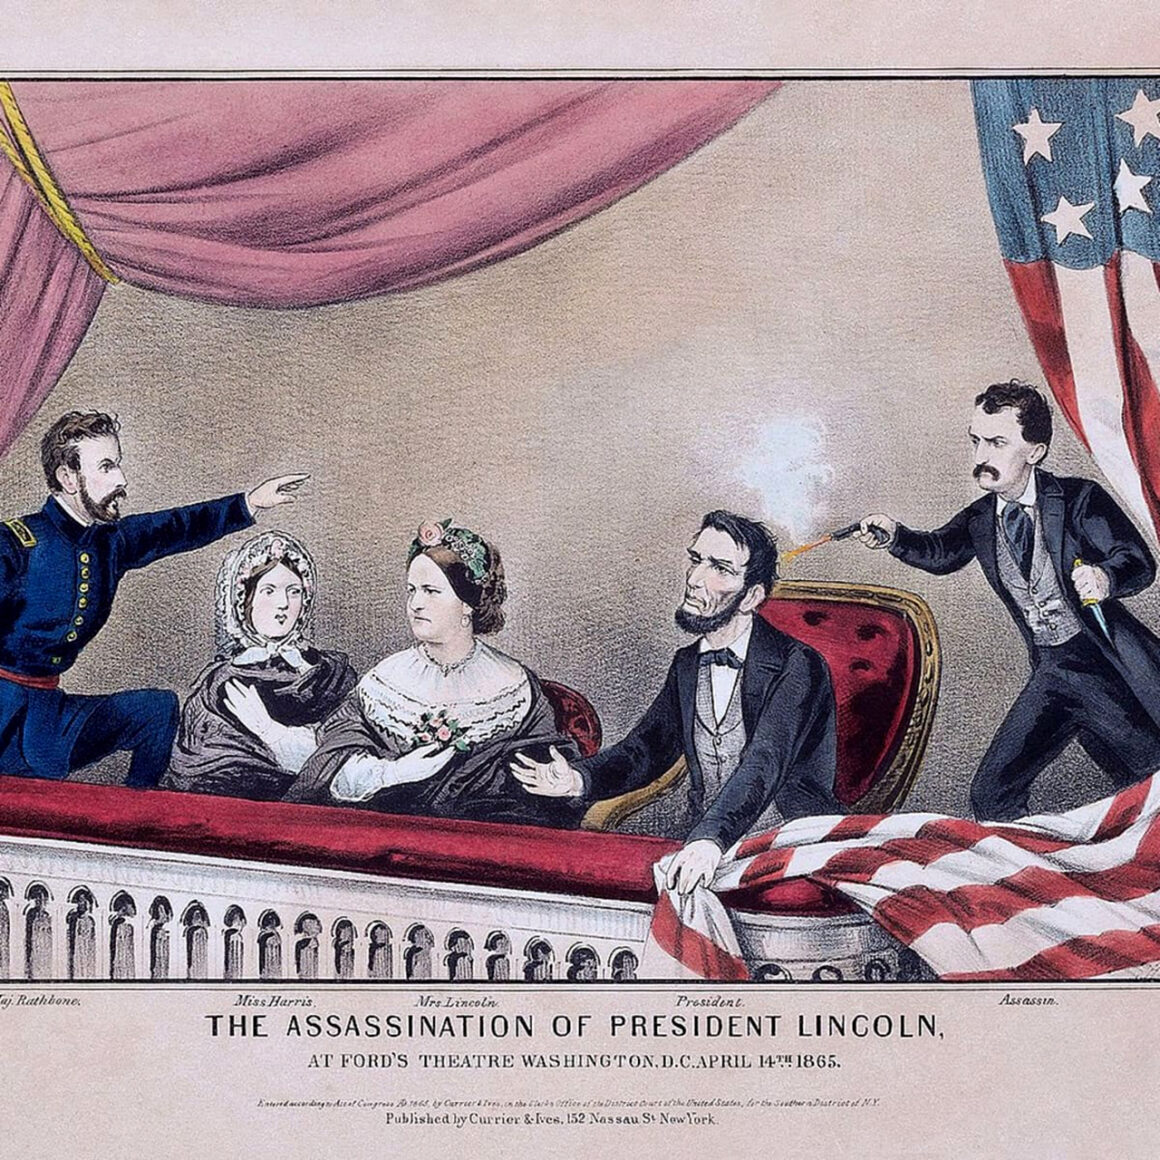 The assassination of President Lincoln, published by Carrier & Ives